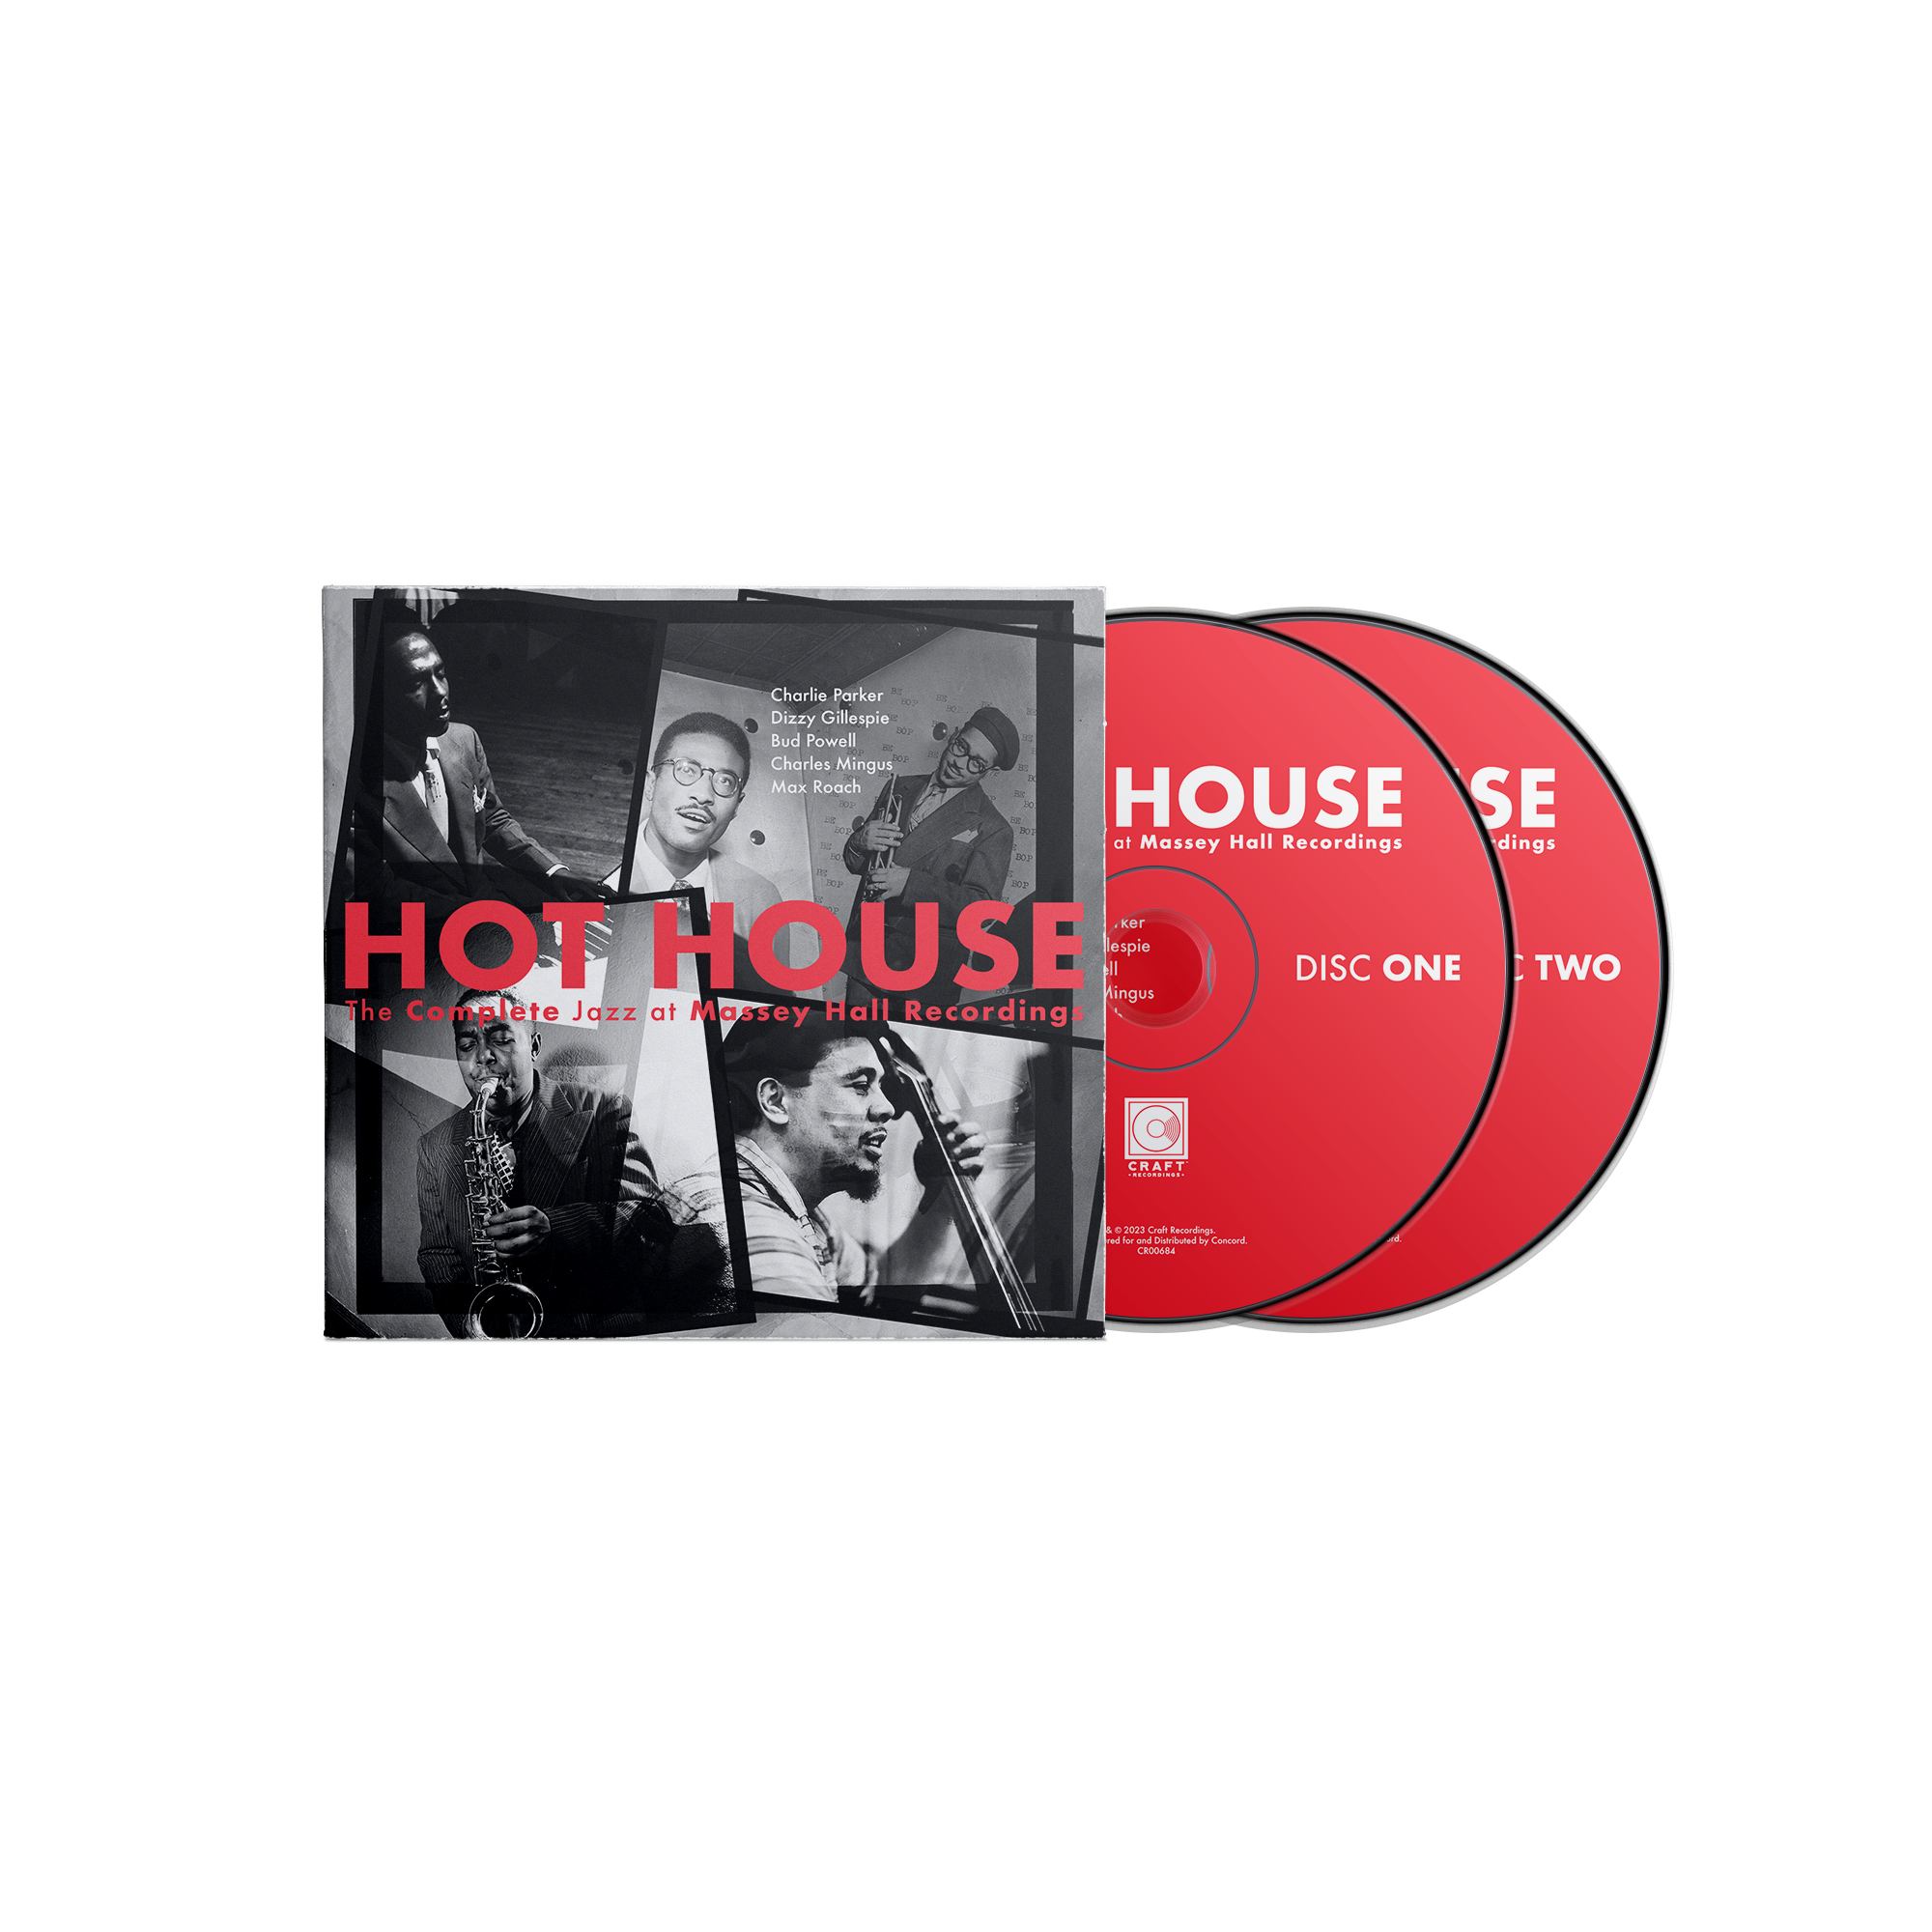 Hot House: The Complete Jazz at Massey Hall Recordings (2-CD Box Set)